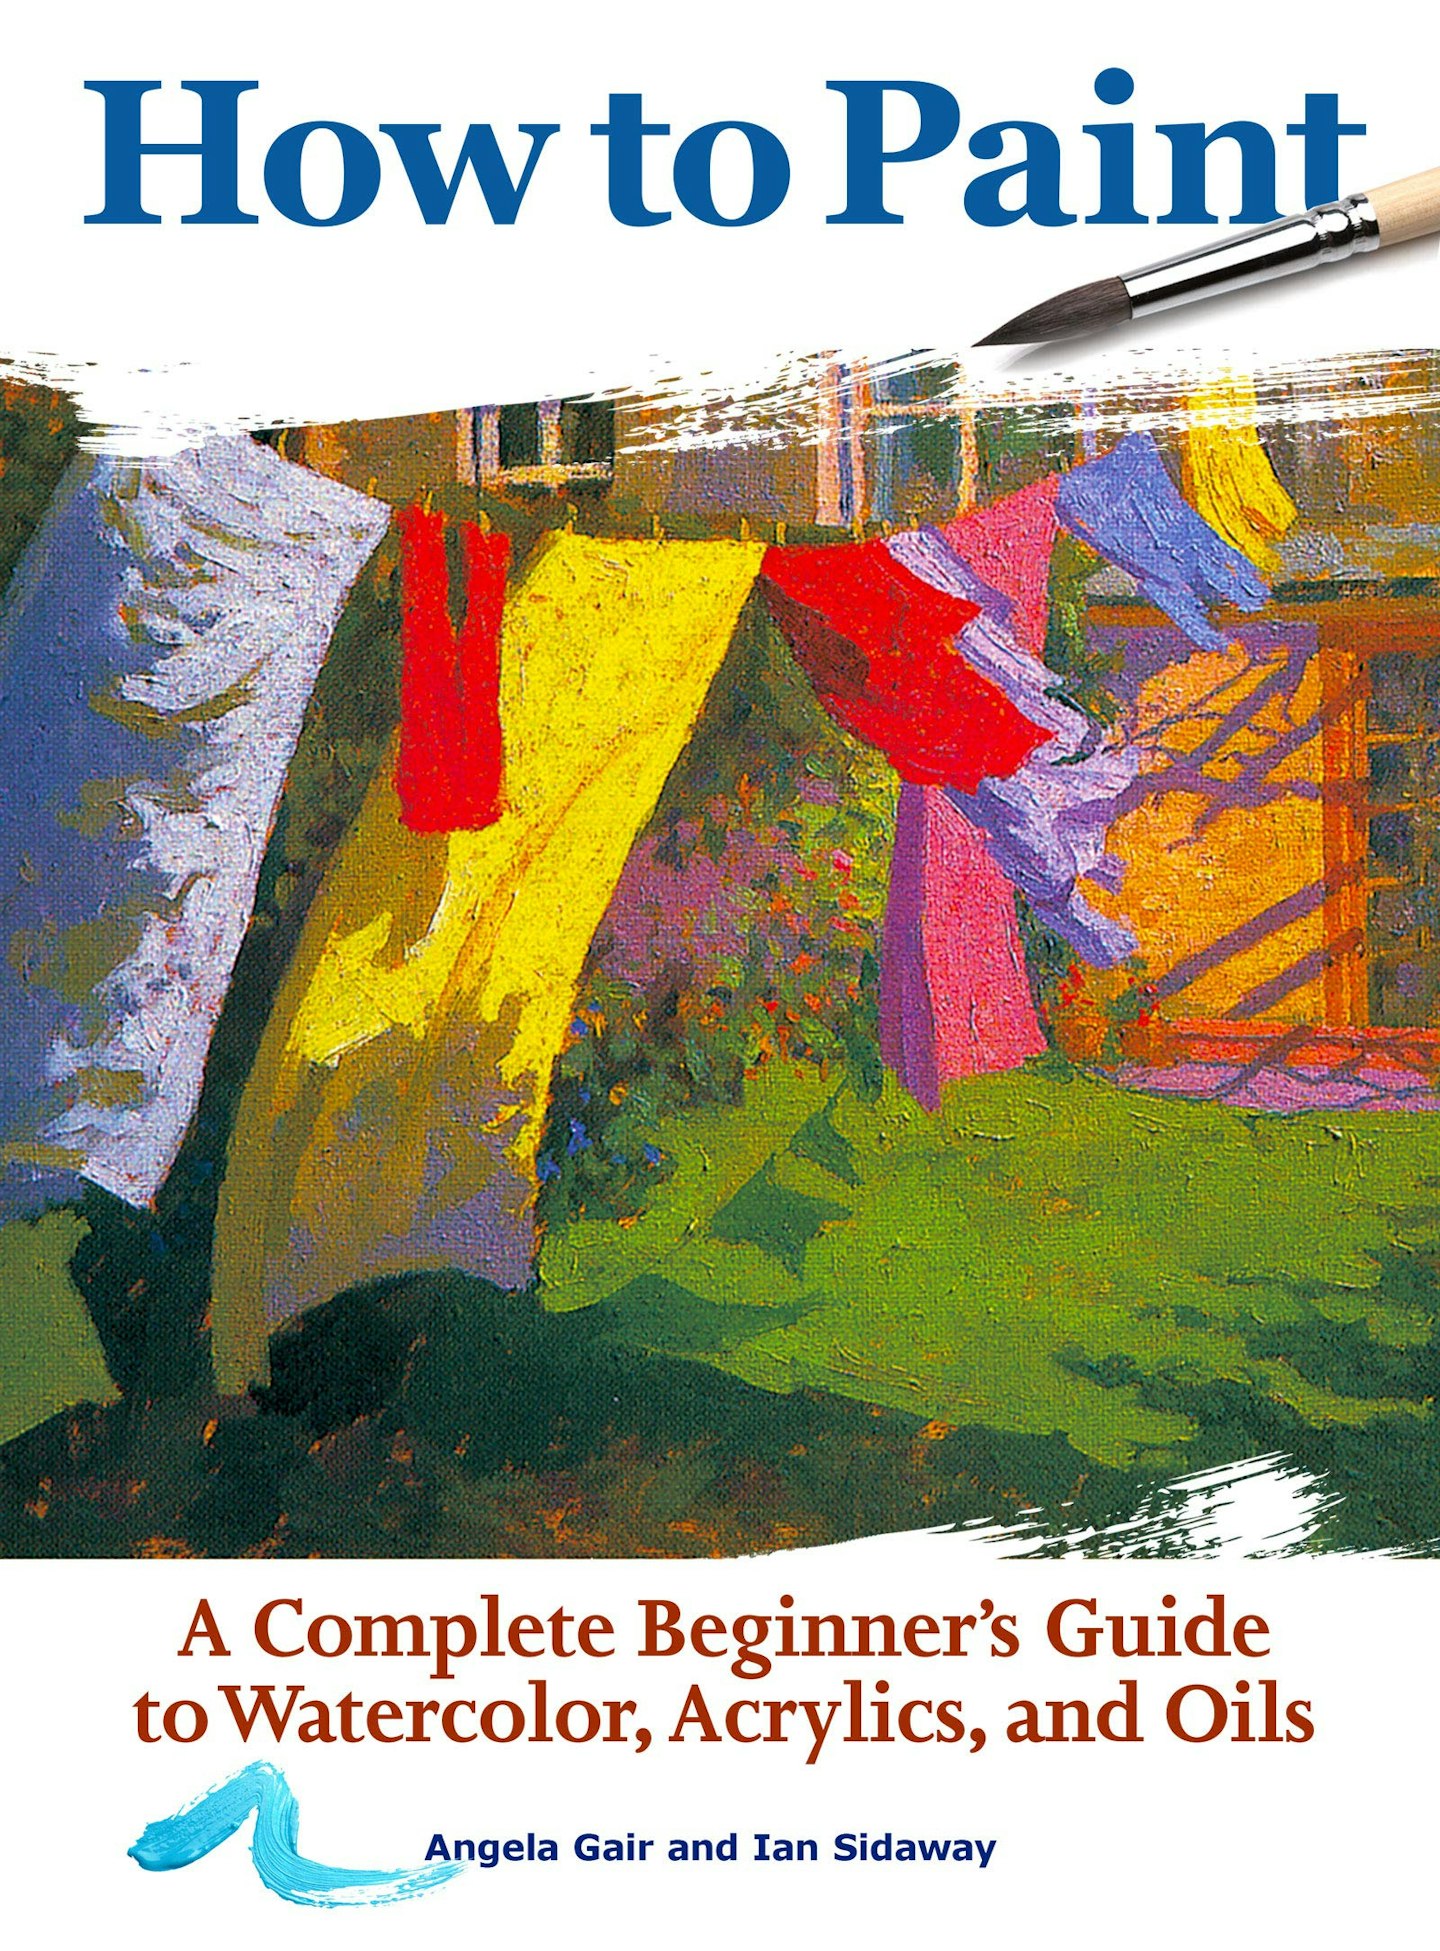 How to Paint: A Complete Beginner's Guide to Watercolors, Acrylics, and Oils by Angela Gair and Ian Sidaway